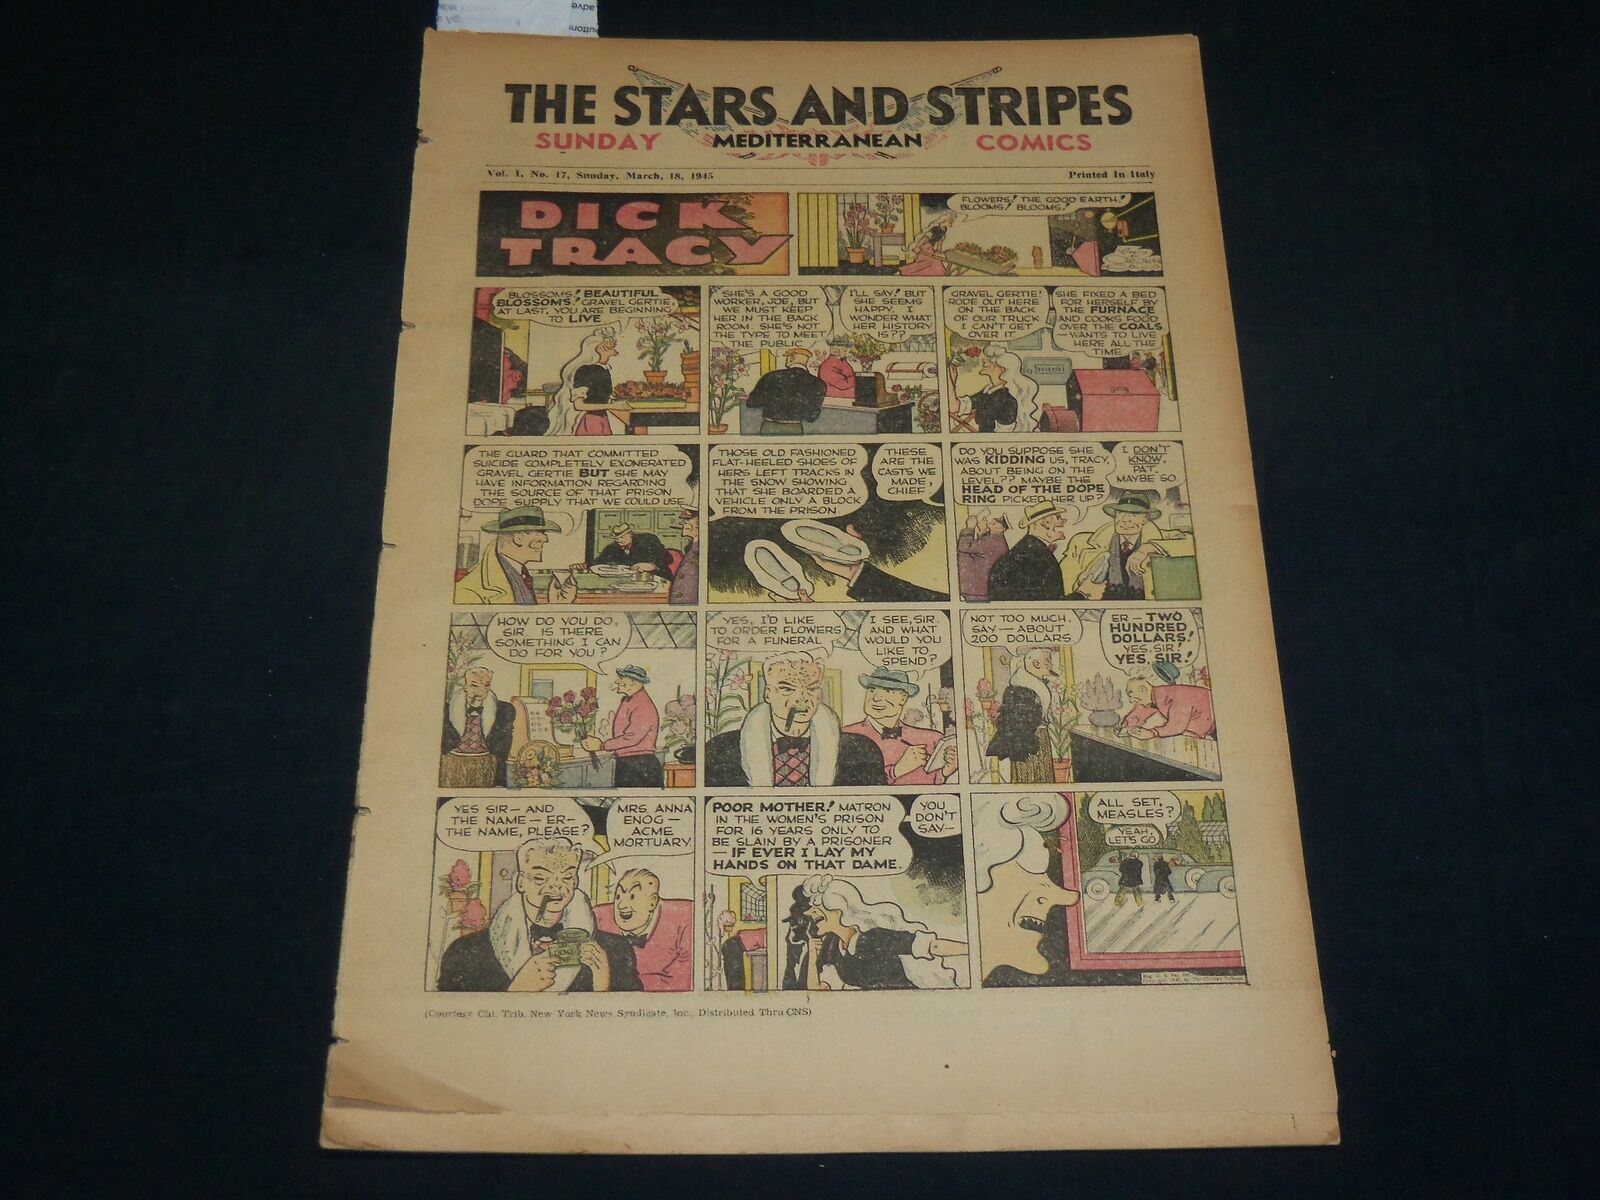 1945 MARCH 18 STARS AND STRIPES SUNDAY MEDITERRANEAN COMICS - ITALY - NP 5241